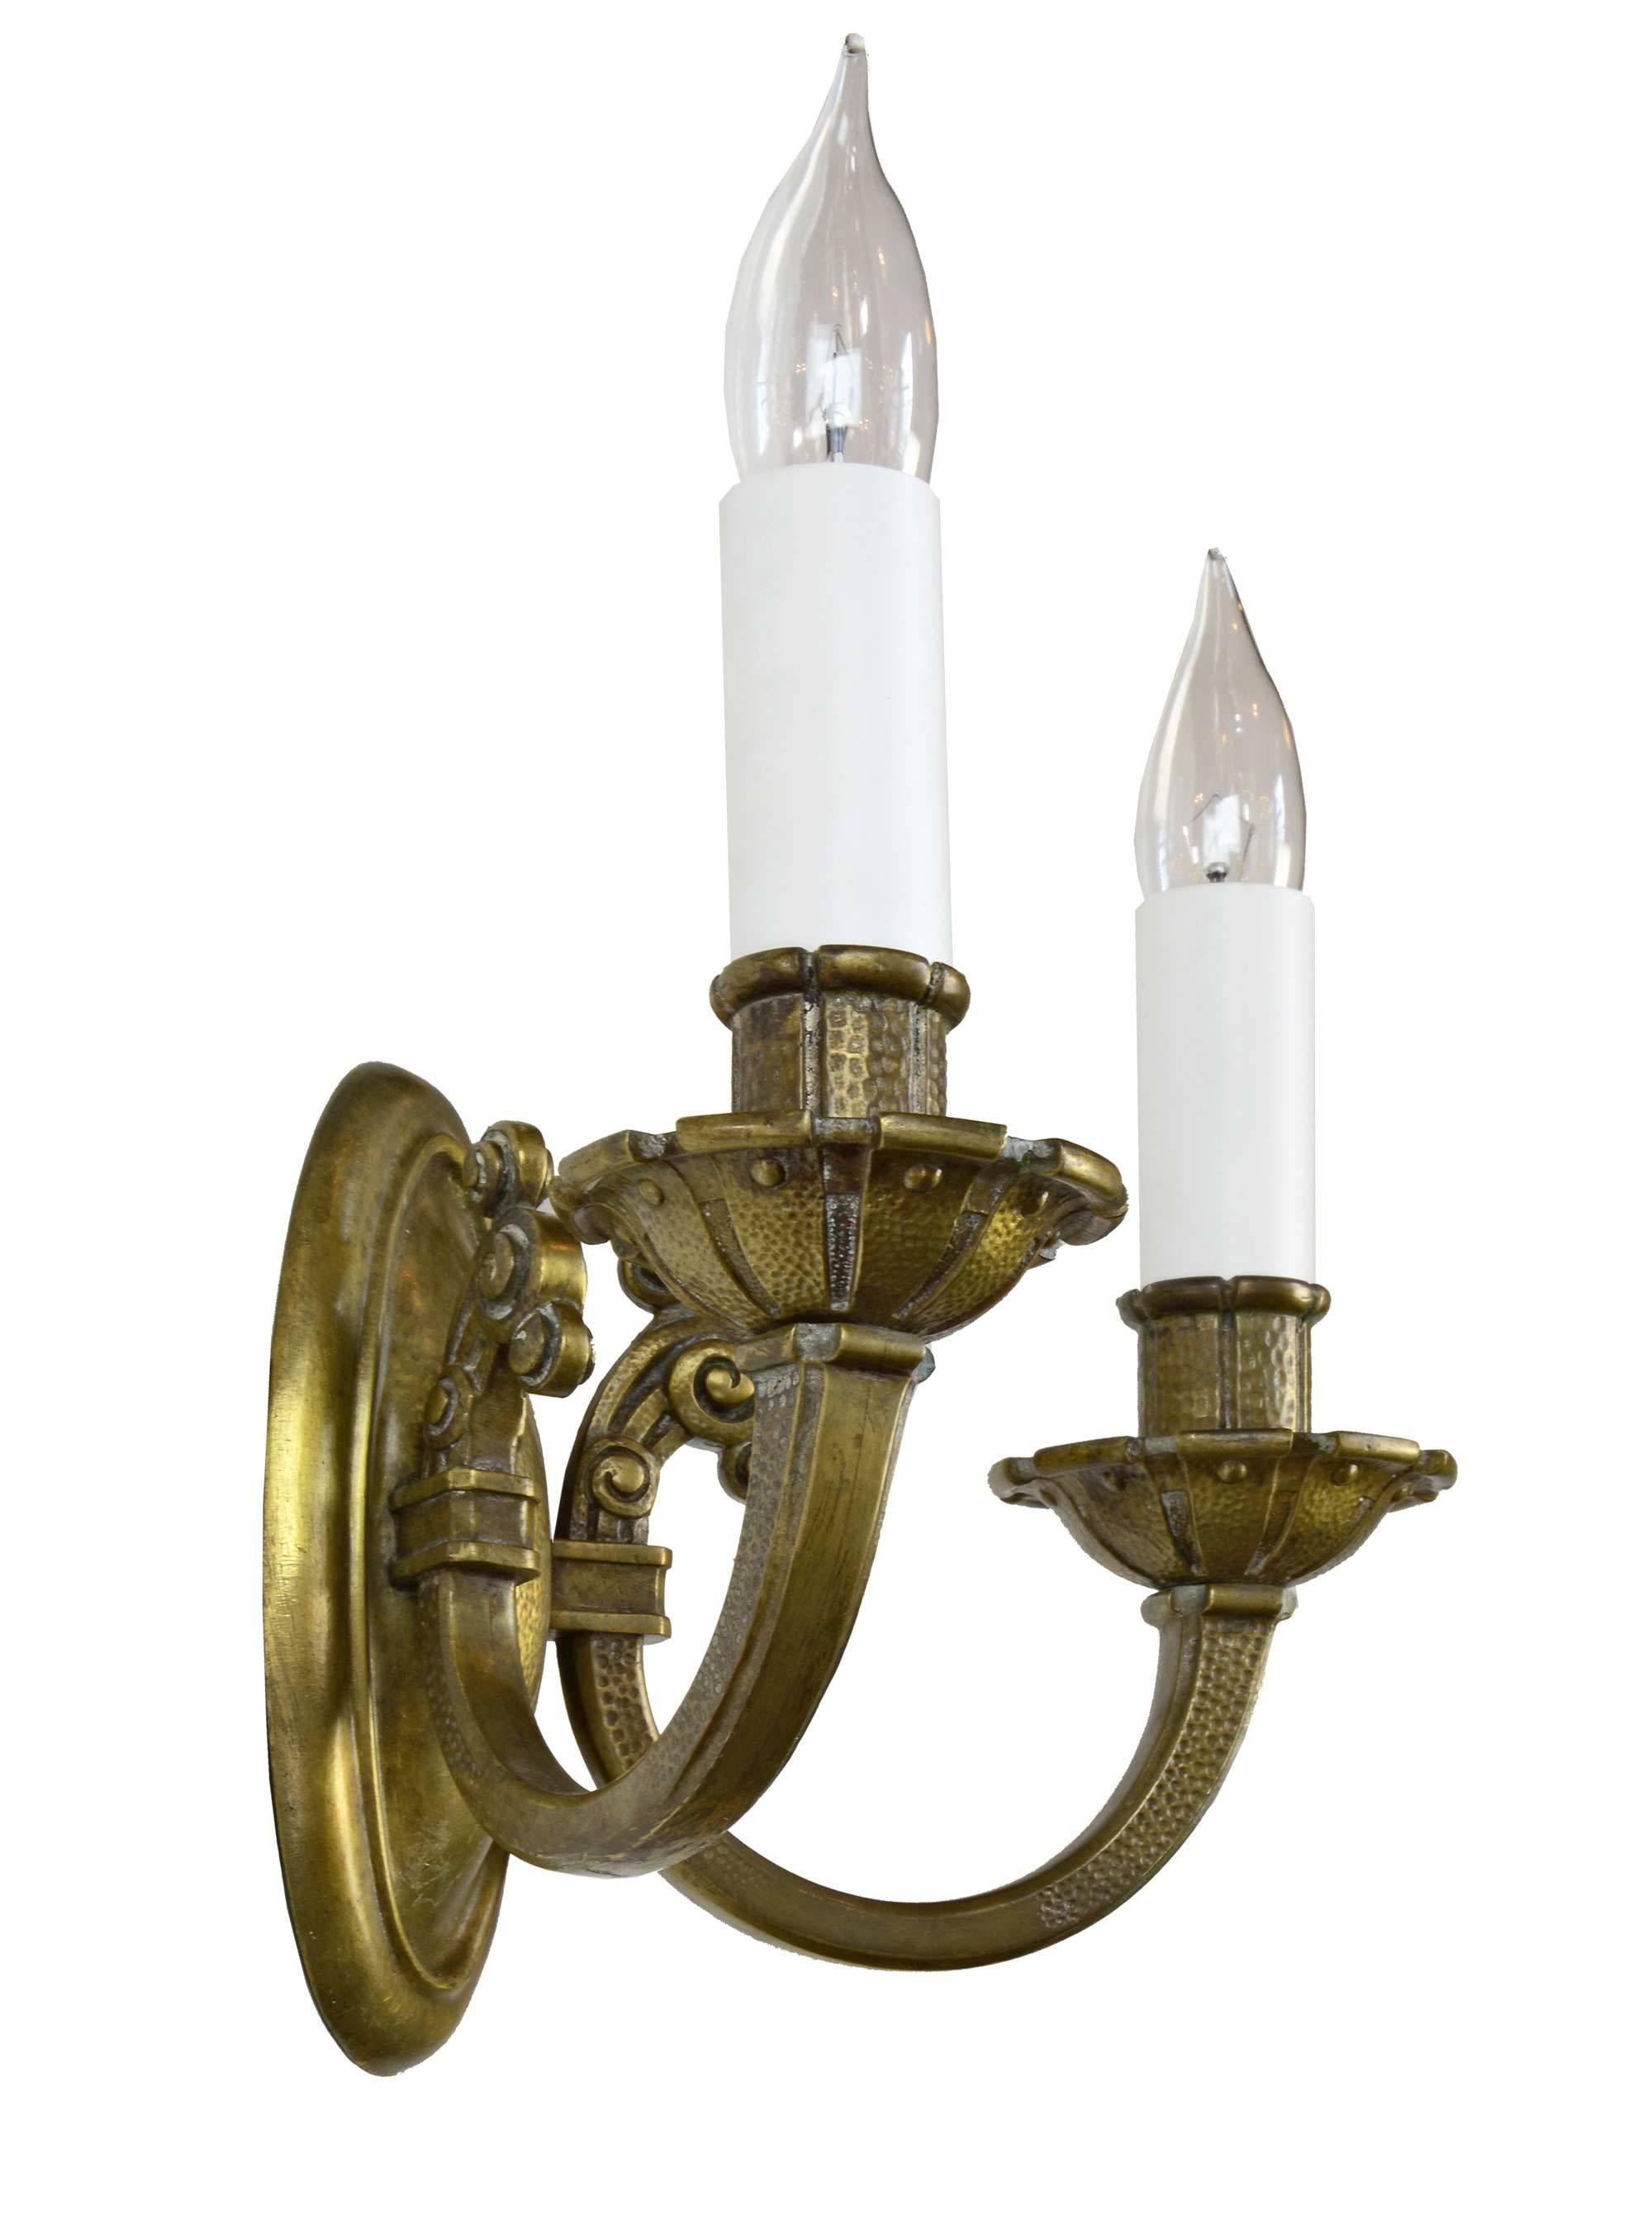 This high-quality sconce has a wonderful polished brass finish and great details in the hammered finish, scrolled arms and crenulated bobeches.

We find that early antique lighting was designed as objects of art and we treat each fixture with